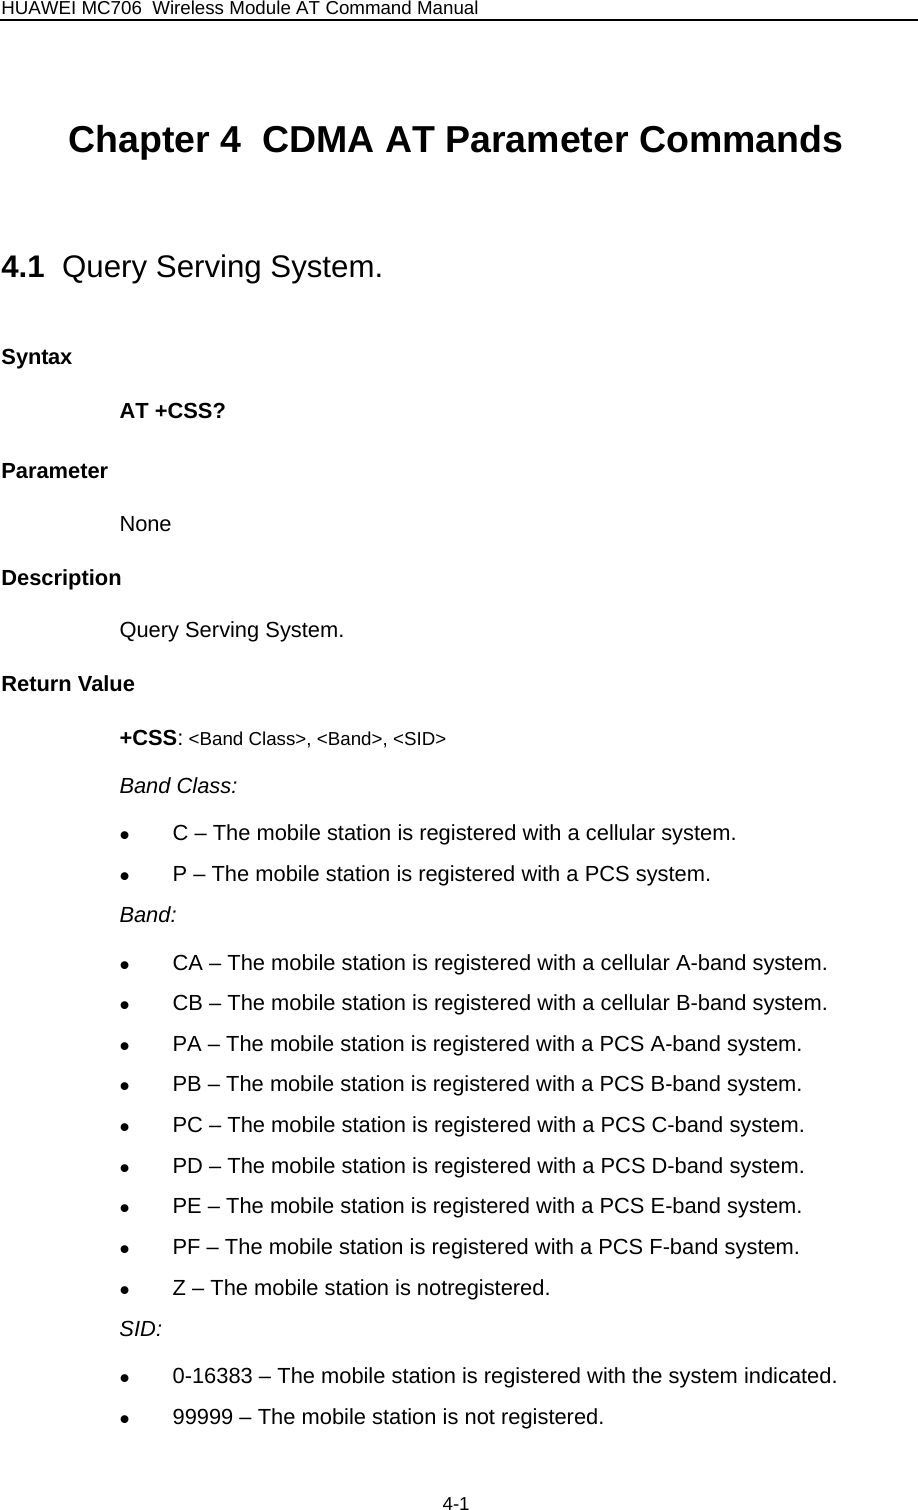 HUAWEI MC706 Wireless Module AT Command Manual  Chapter 4  CDMA AT Parameter Commands   4.1  Query Serving System. Syntax AT +CSS? Parameter None Description Query Serving System. Return Value +CSS: &lt;Band Class&gt;, &lt;Band&gt;, &lt;SID&gt; Band Class: z C – The mobile station is registered with a cellular system. z P – The mobile station is registered with a PCS system. Band: z CA – The mobile station is registered with a cellular A-band system. z CB – The mobile station is registered with a cellular B-band system. z PA – The mobile station is registered with a PCS A-band system. z PB – The mobile station is registered with a PCS B-band system. z PC – The mobile station is registered with a PCS C-band system. z PD – The mobile station is registered with a PCS D-band system. z PE – The mobile station is registered with a PCS E-band system. z PF – The mobile station is registered with a PCS F-band system. z Z – The mobile station is notregistered. SID: z 0-16383 – The mobile station is registered with the system indicated. z 99999 – The mobile station is not registered. 4-1 